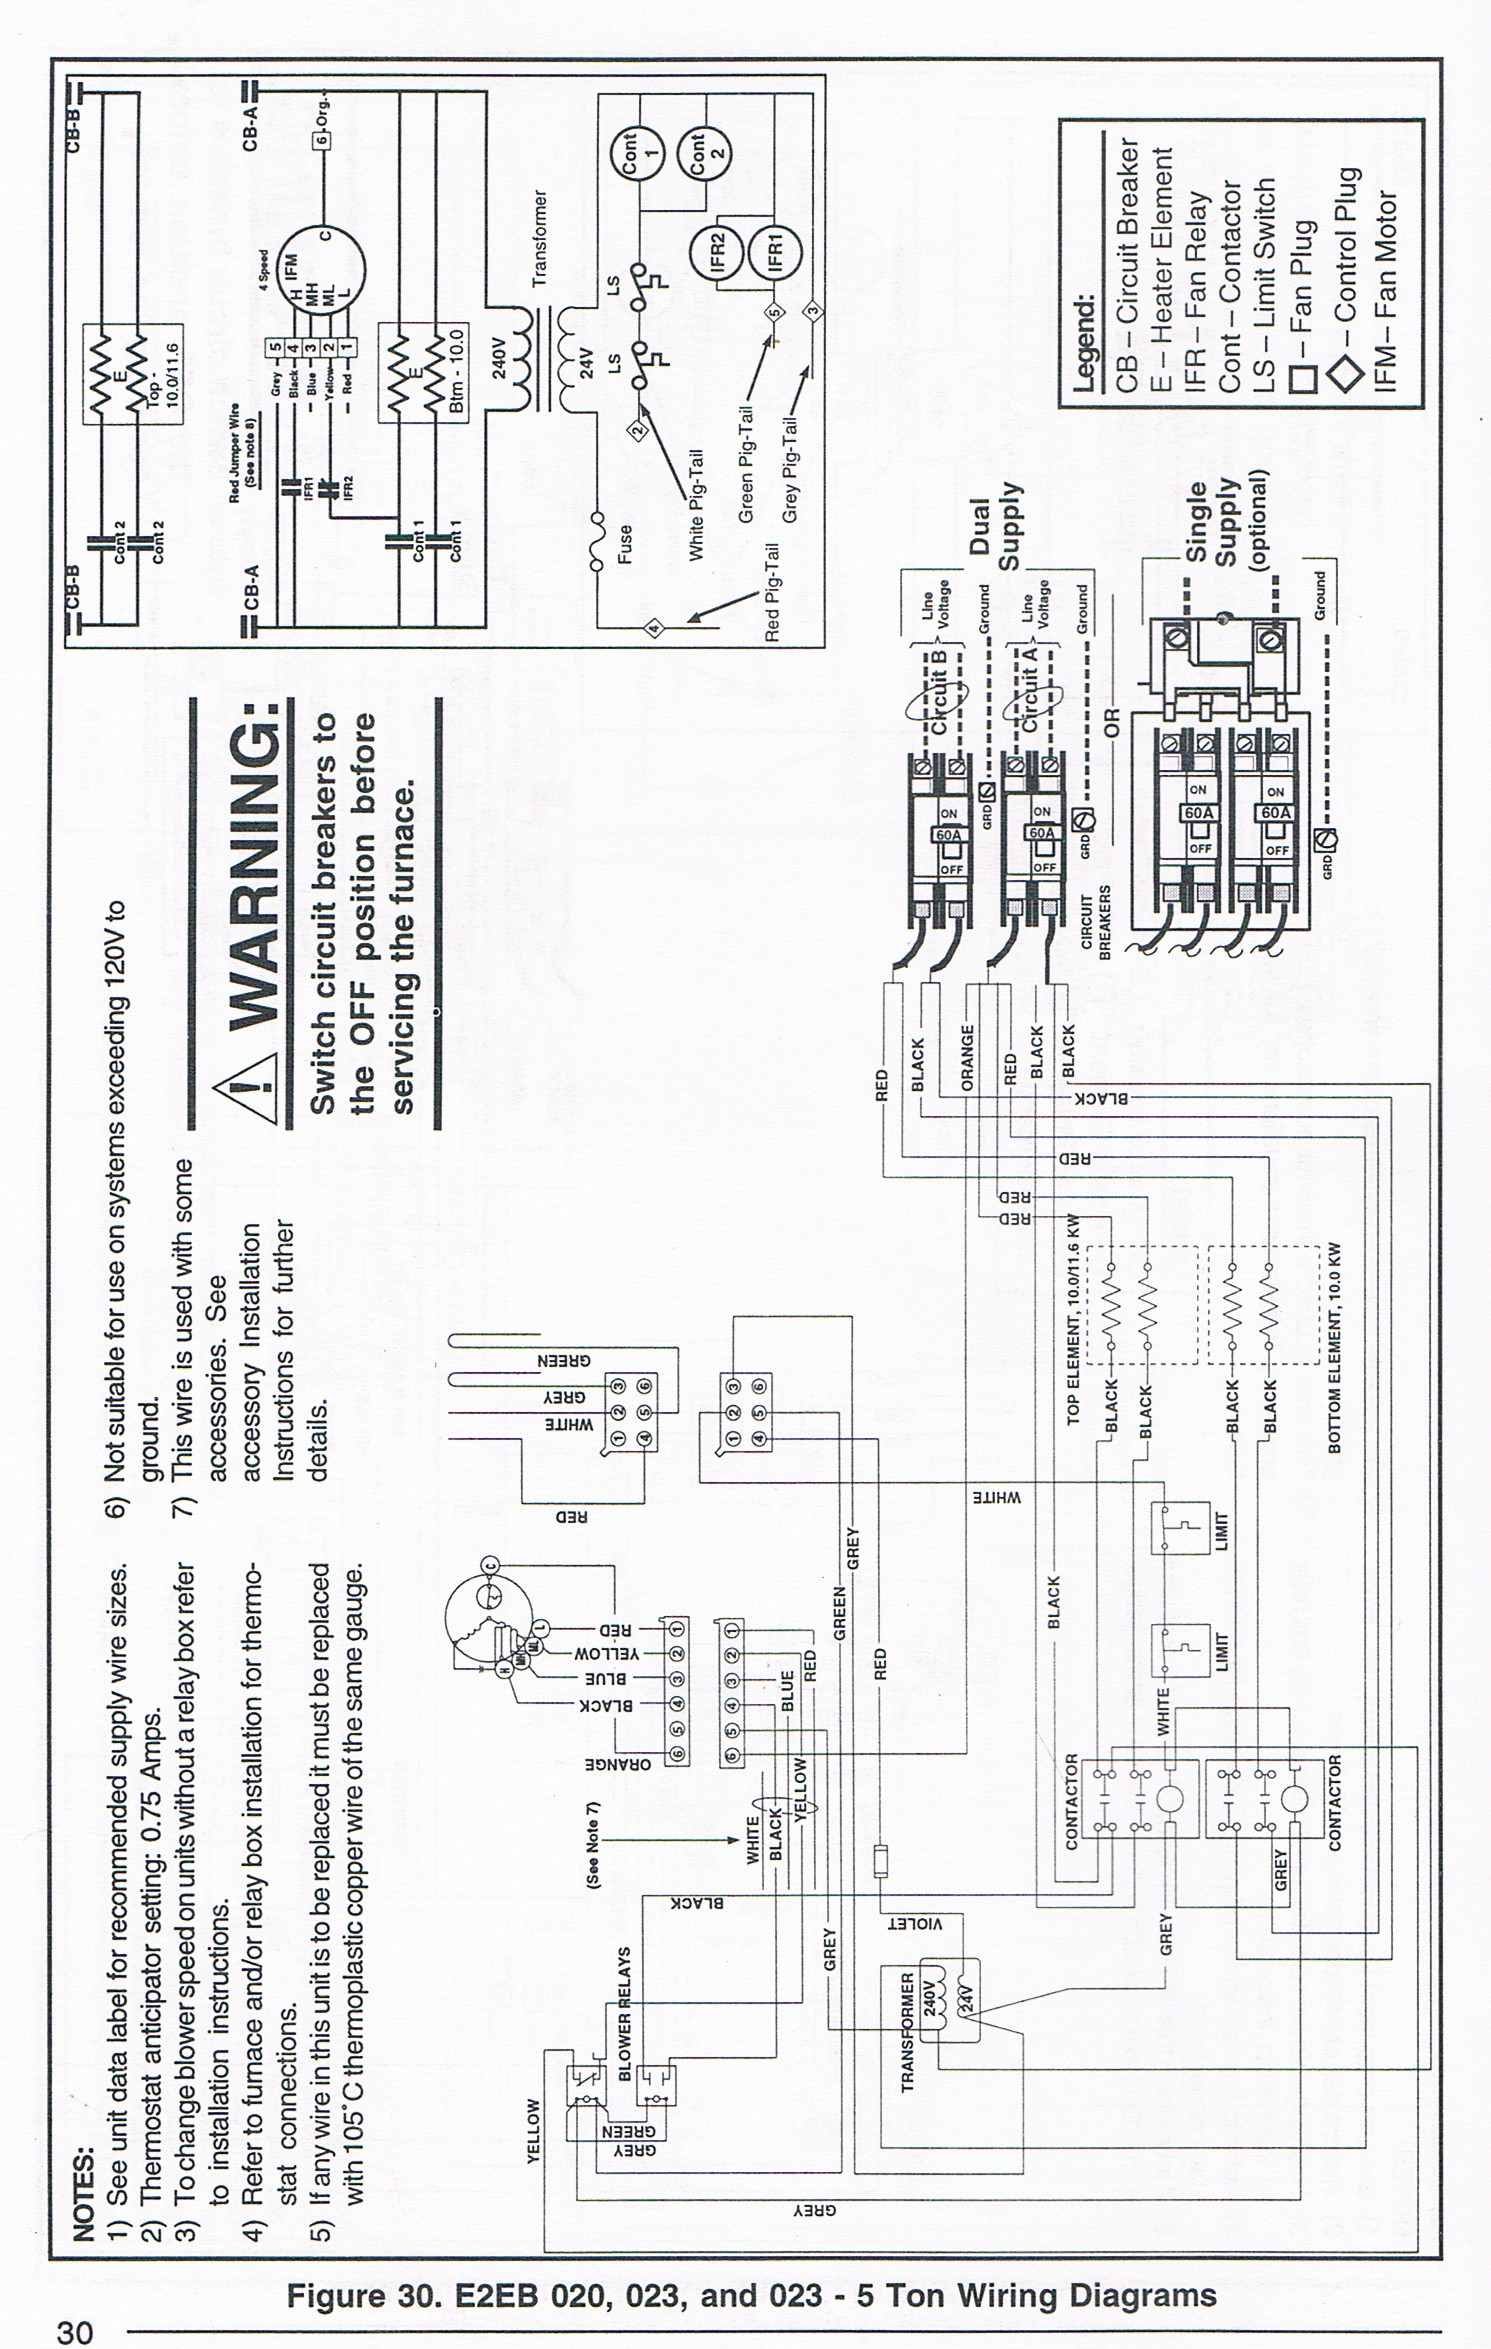 Mobile Home Intertherm Gas Furnace Wiring Diagram - Wiring Diagram - Gas Furnace Thermostat Wiring Diagram